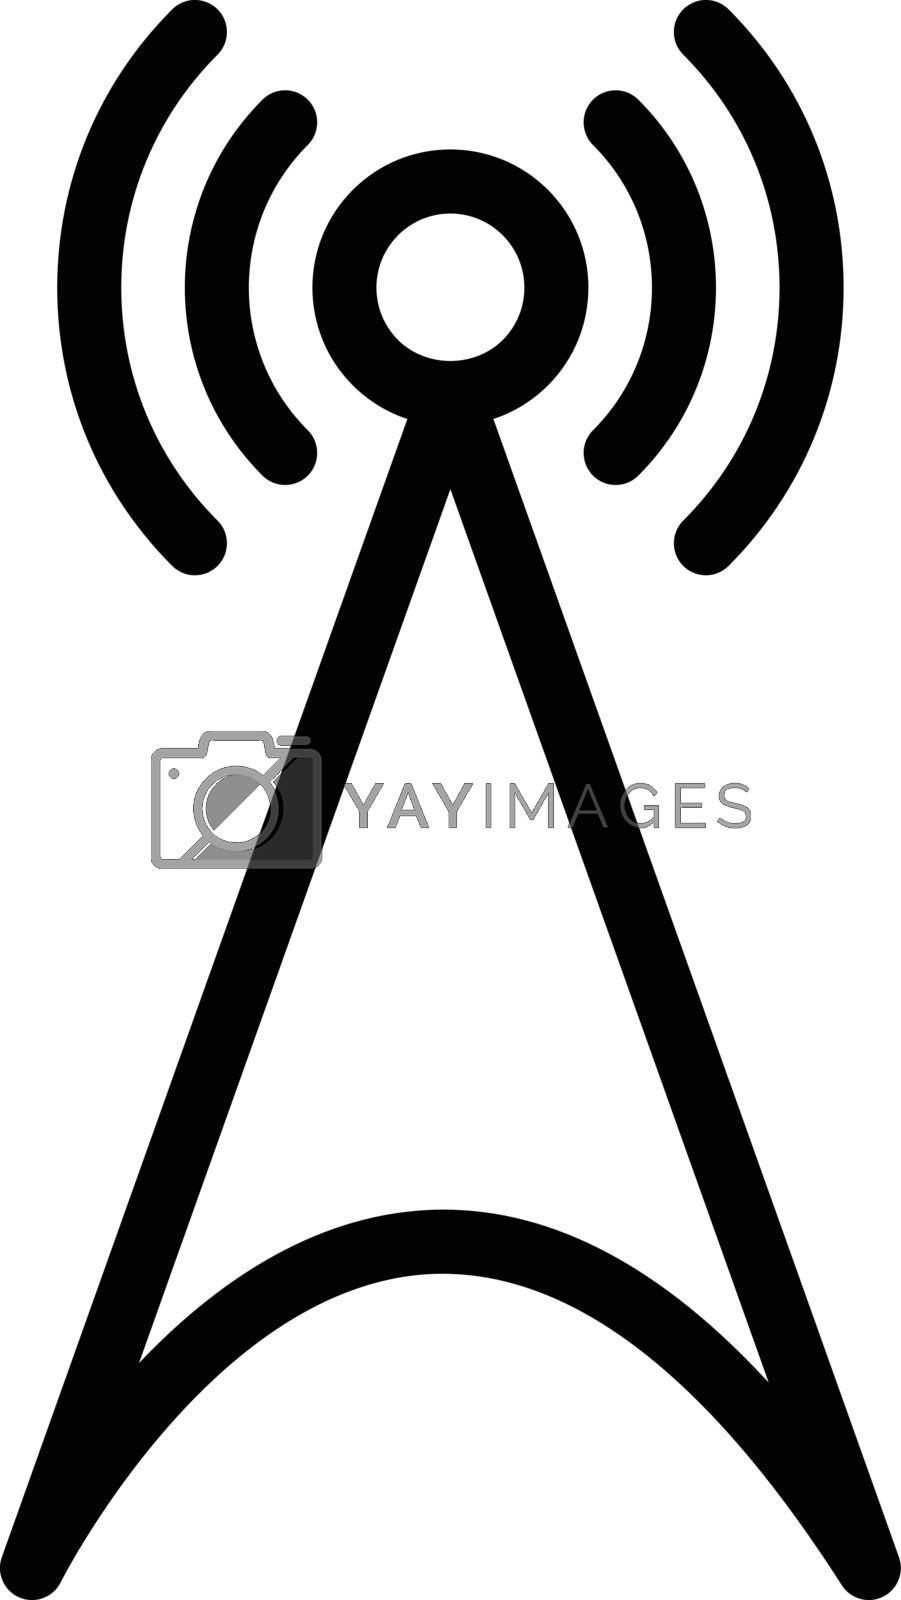 Royalty free image of communication by vectorstall